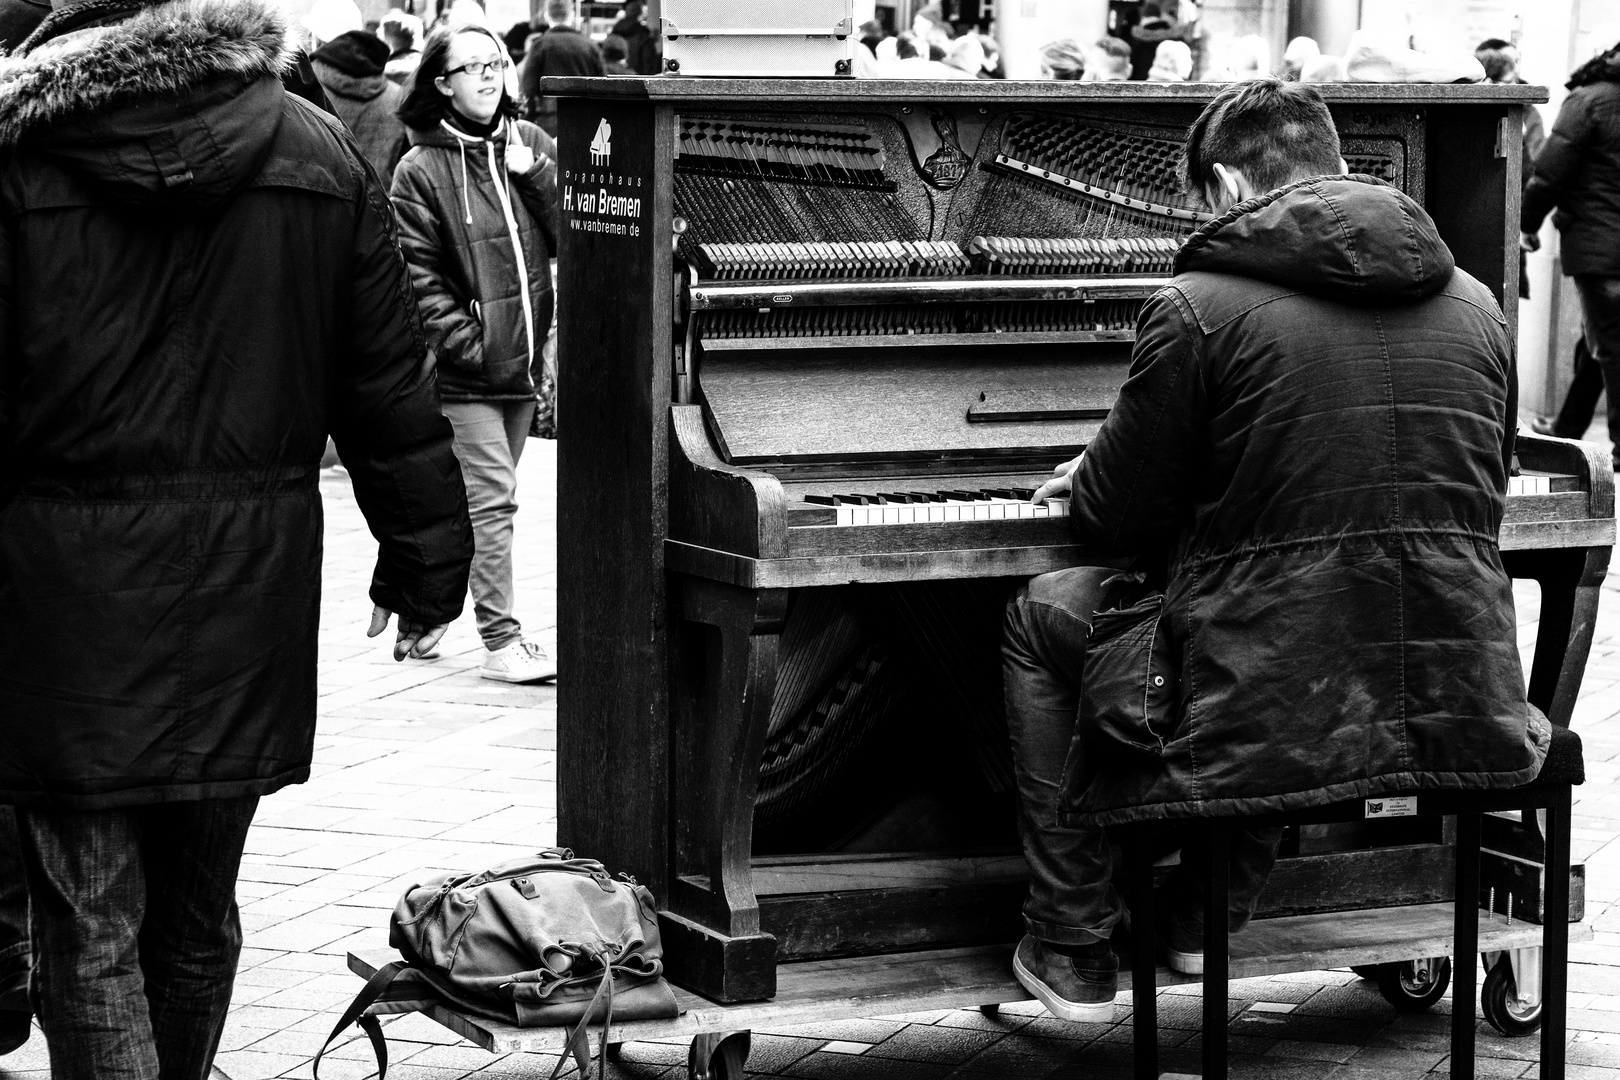 playing the piano in the pedestrian area